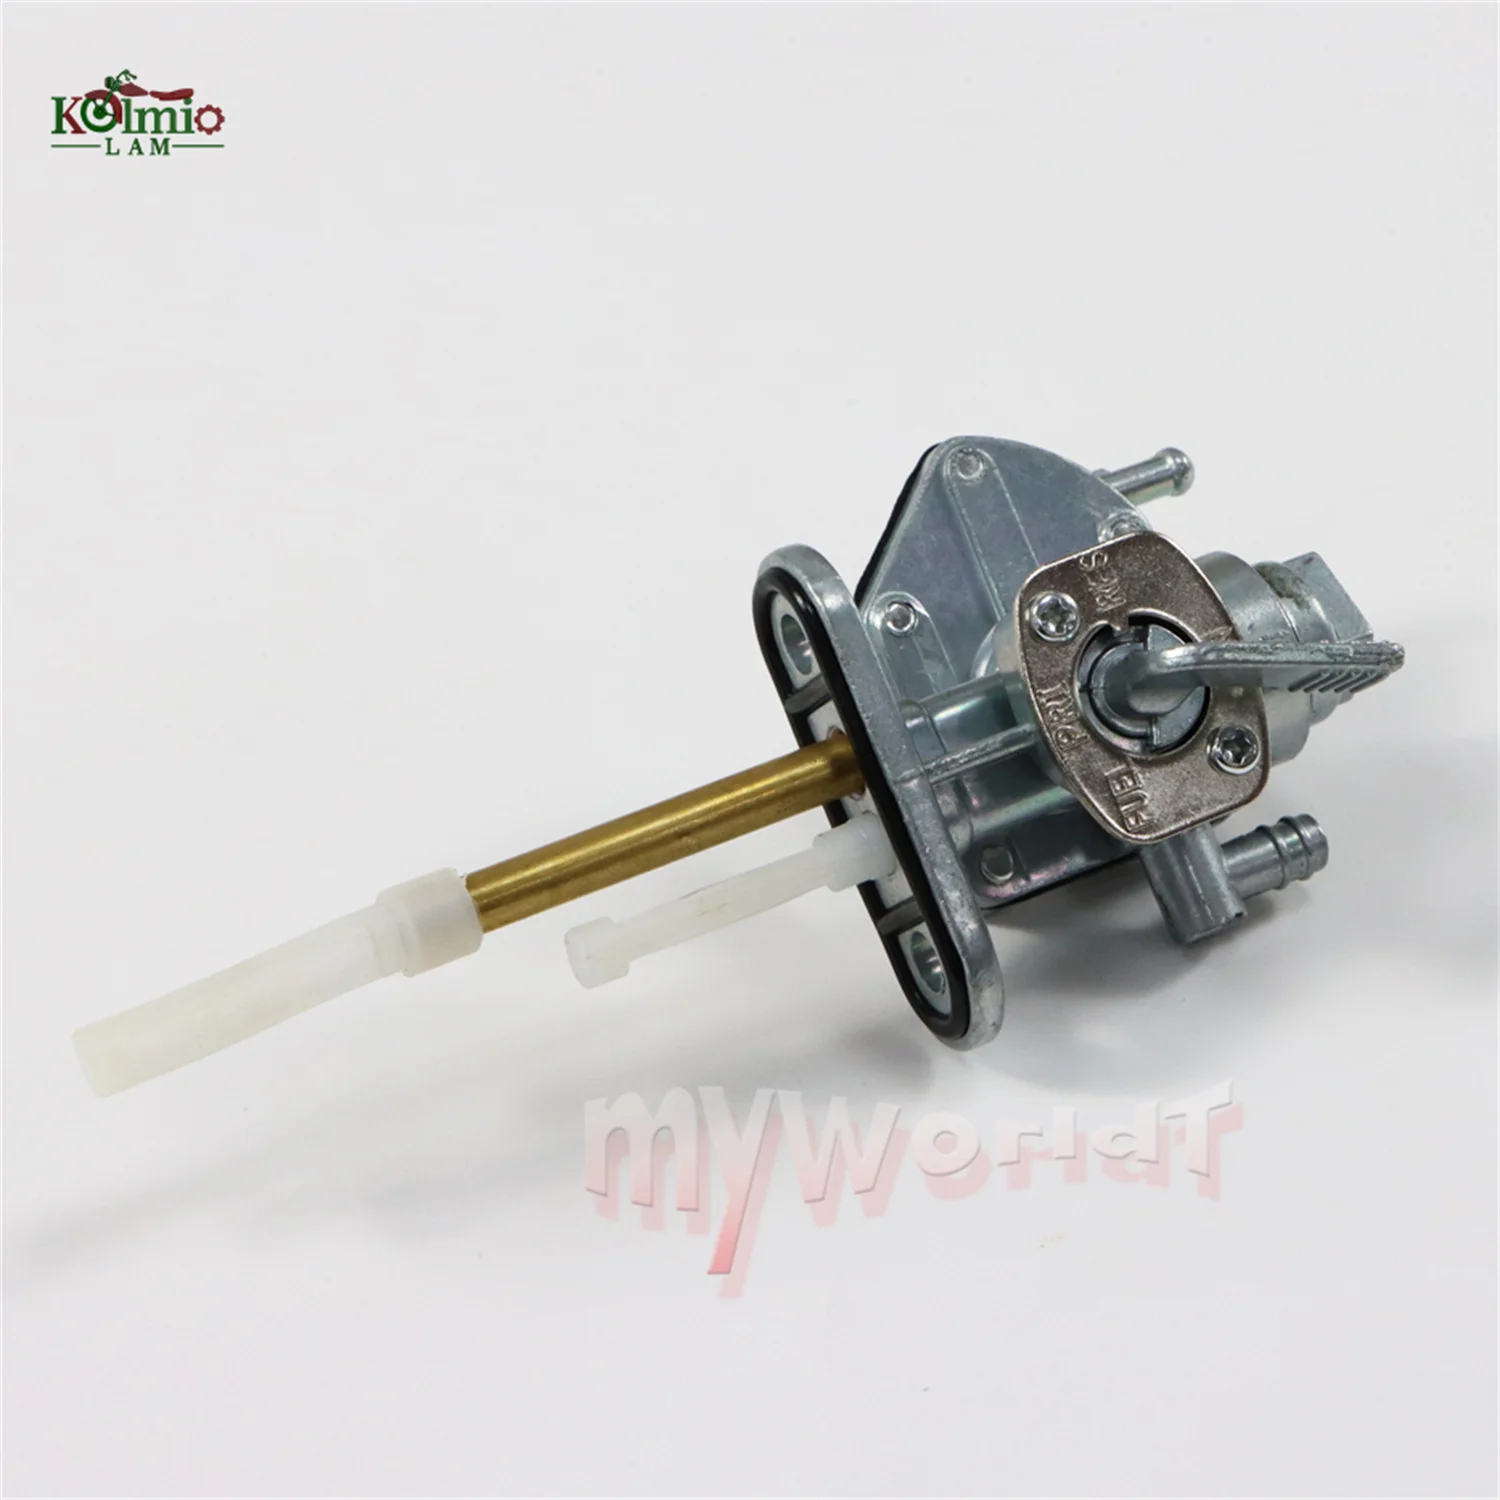 

Fit For YAMAHA Virago 700 750 920 XV700 XV750 XV920 Motorcycle Accessories Engine Fuel Gas Tank Petcock Valve Switch